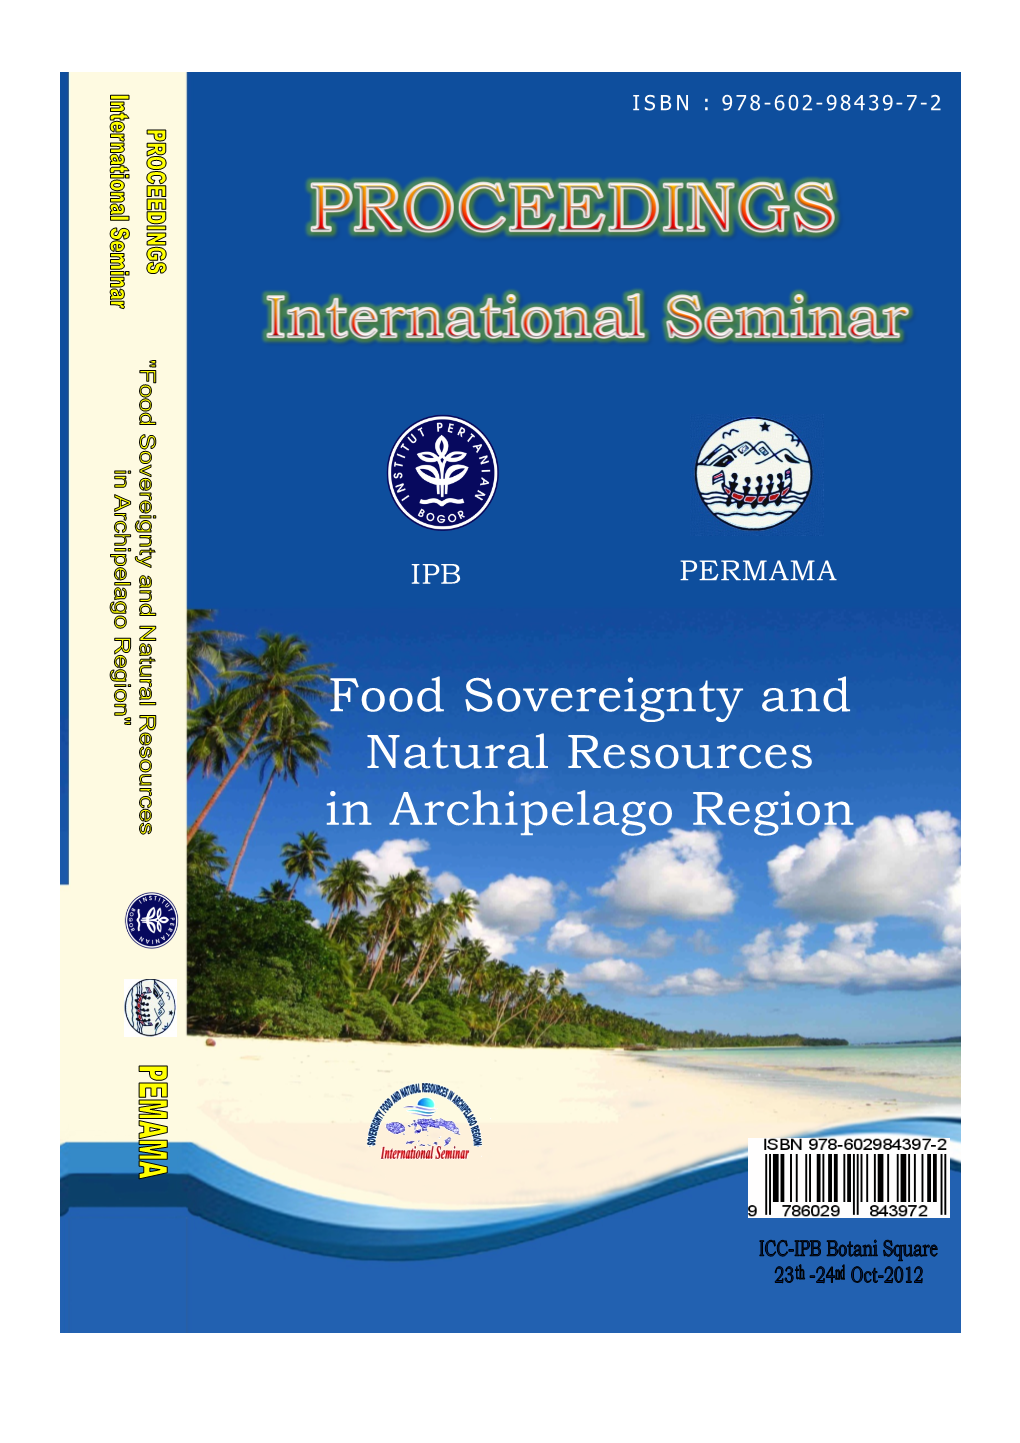 Food Sovereignty and Natural Resources in Archipelago Region Proceedings International Seminar